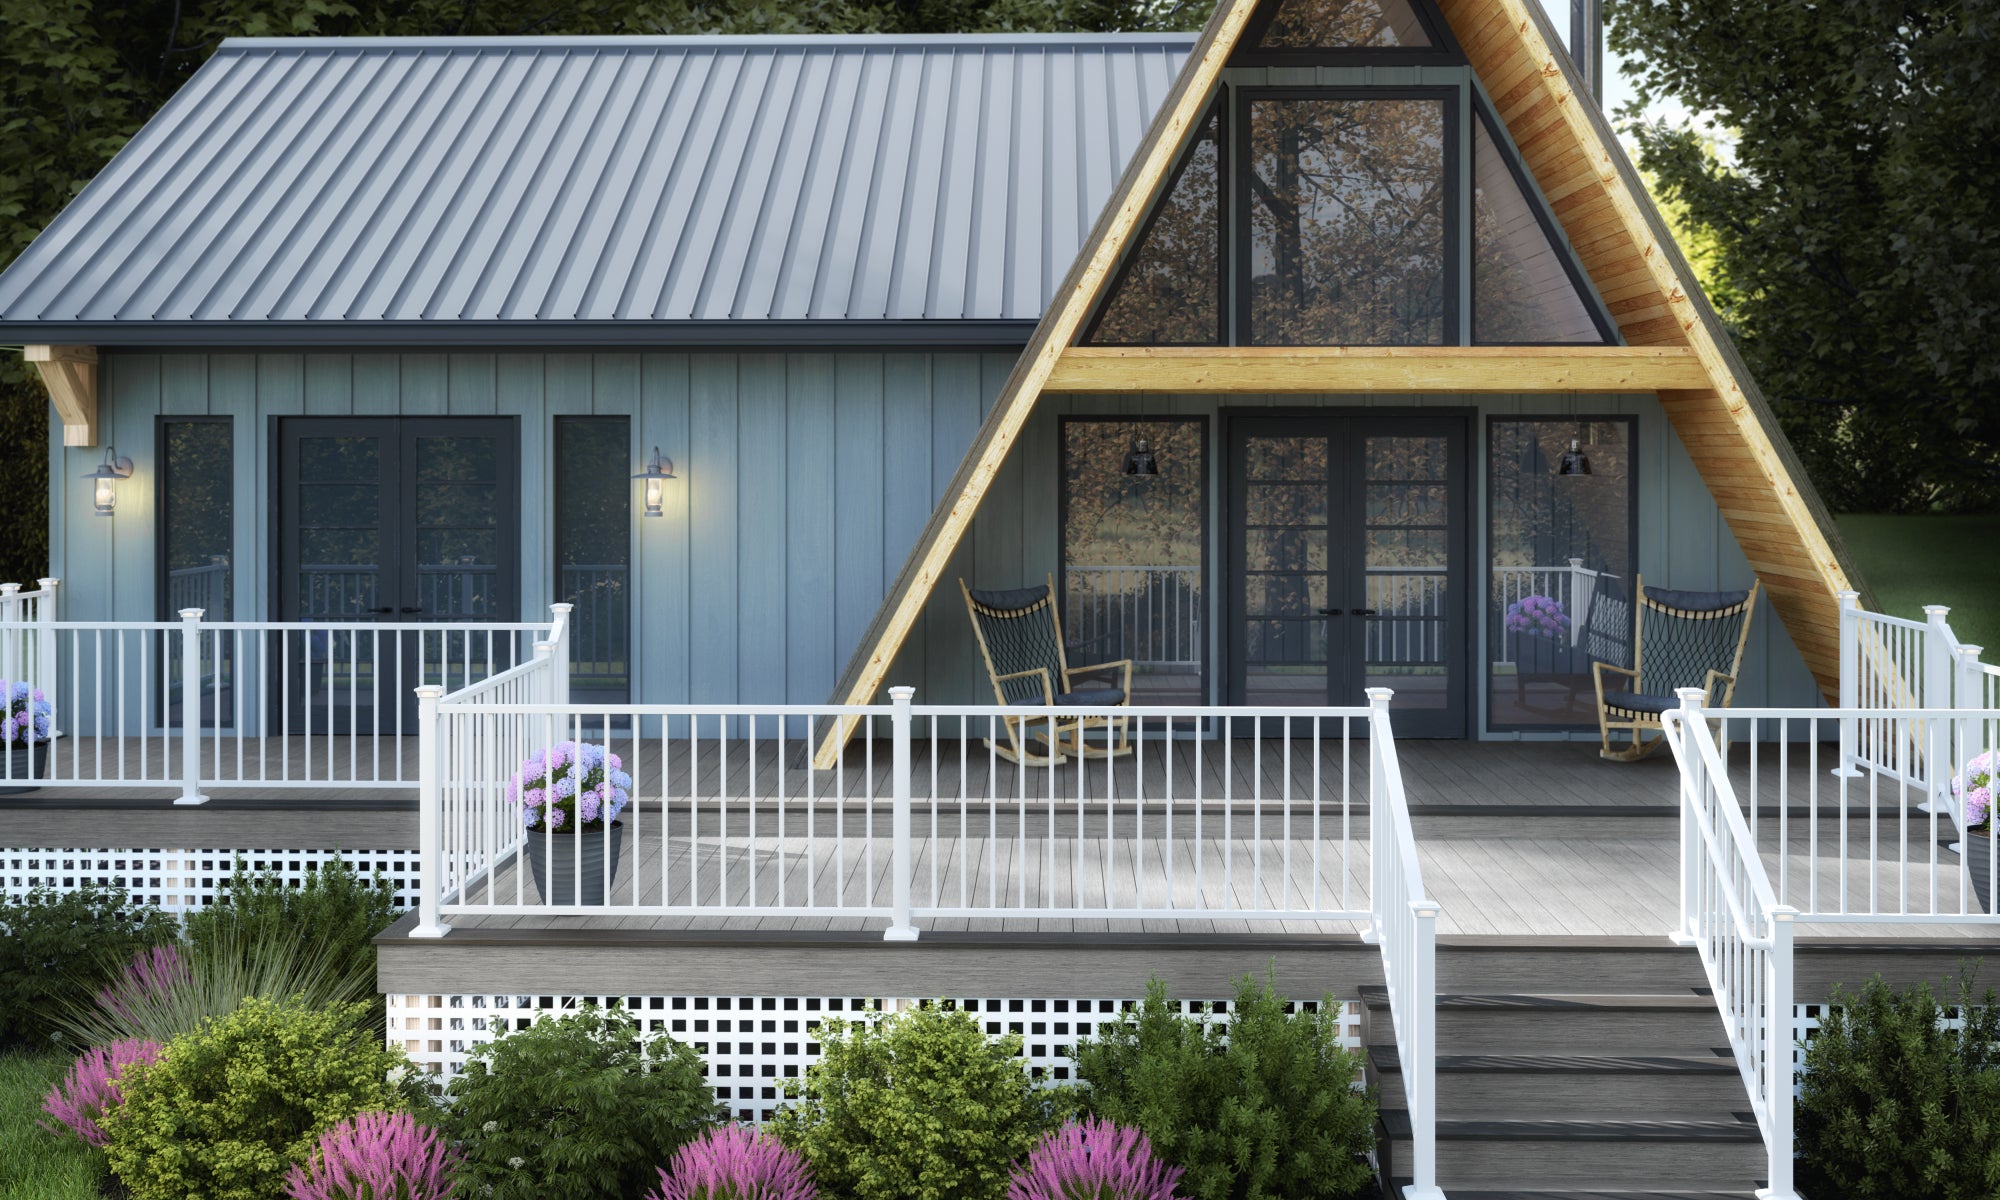 A-Frame House with Deck Constructed From Deckorators Composite Decking and Contemporary Railing in Textured White